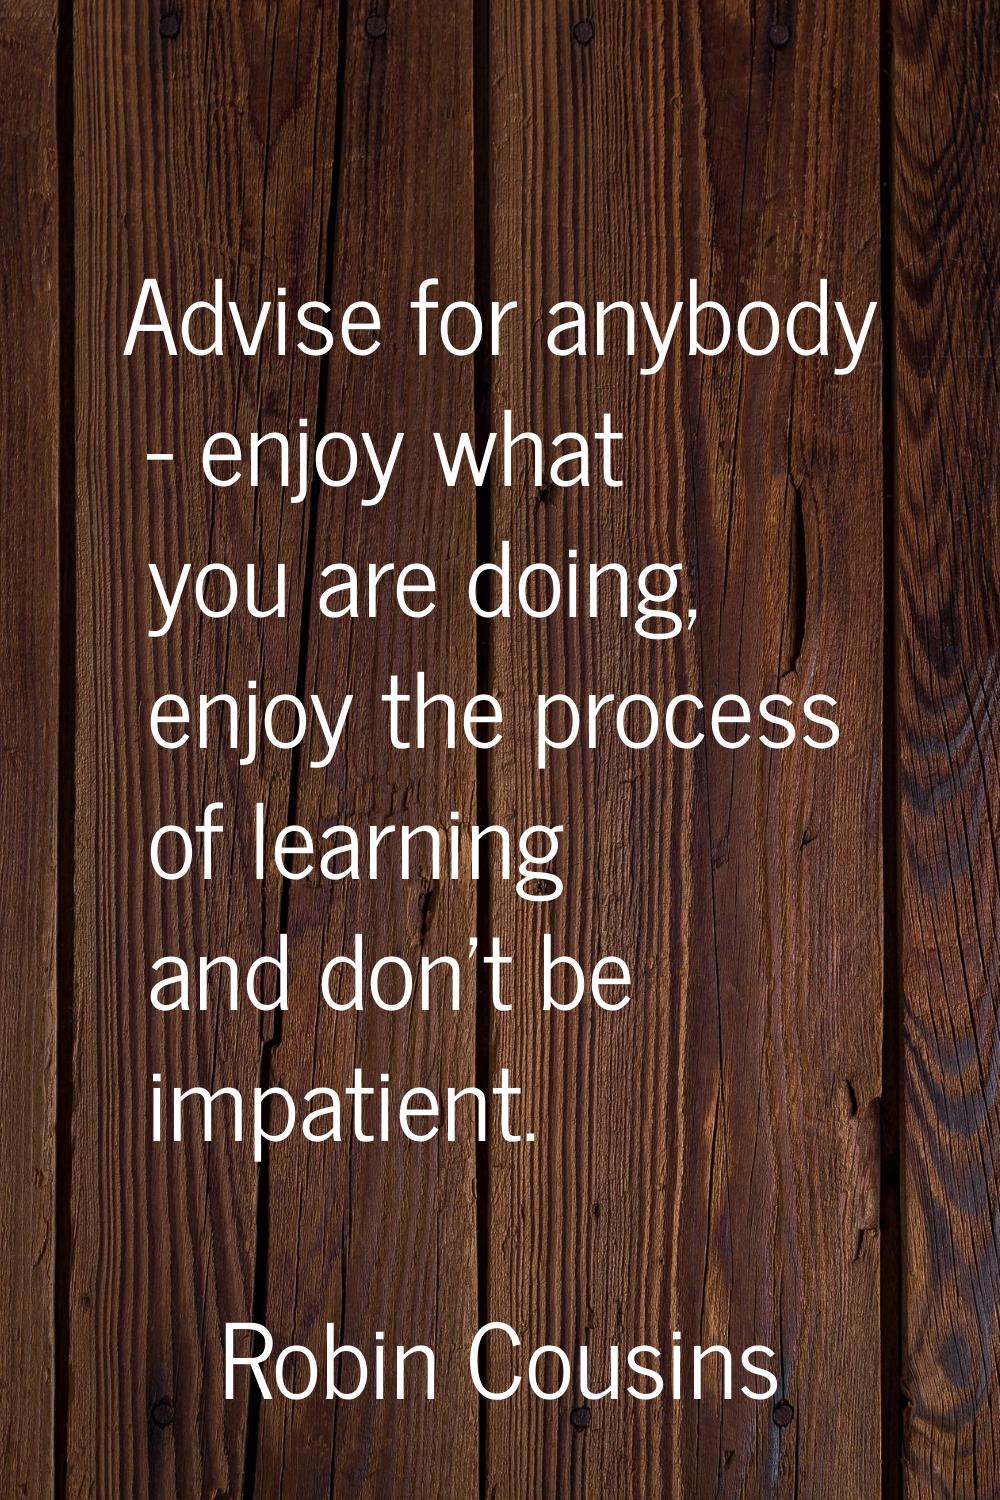 Advise for anybody - enjoy what you are doing, enjoy the process of learning and don't be impatient